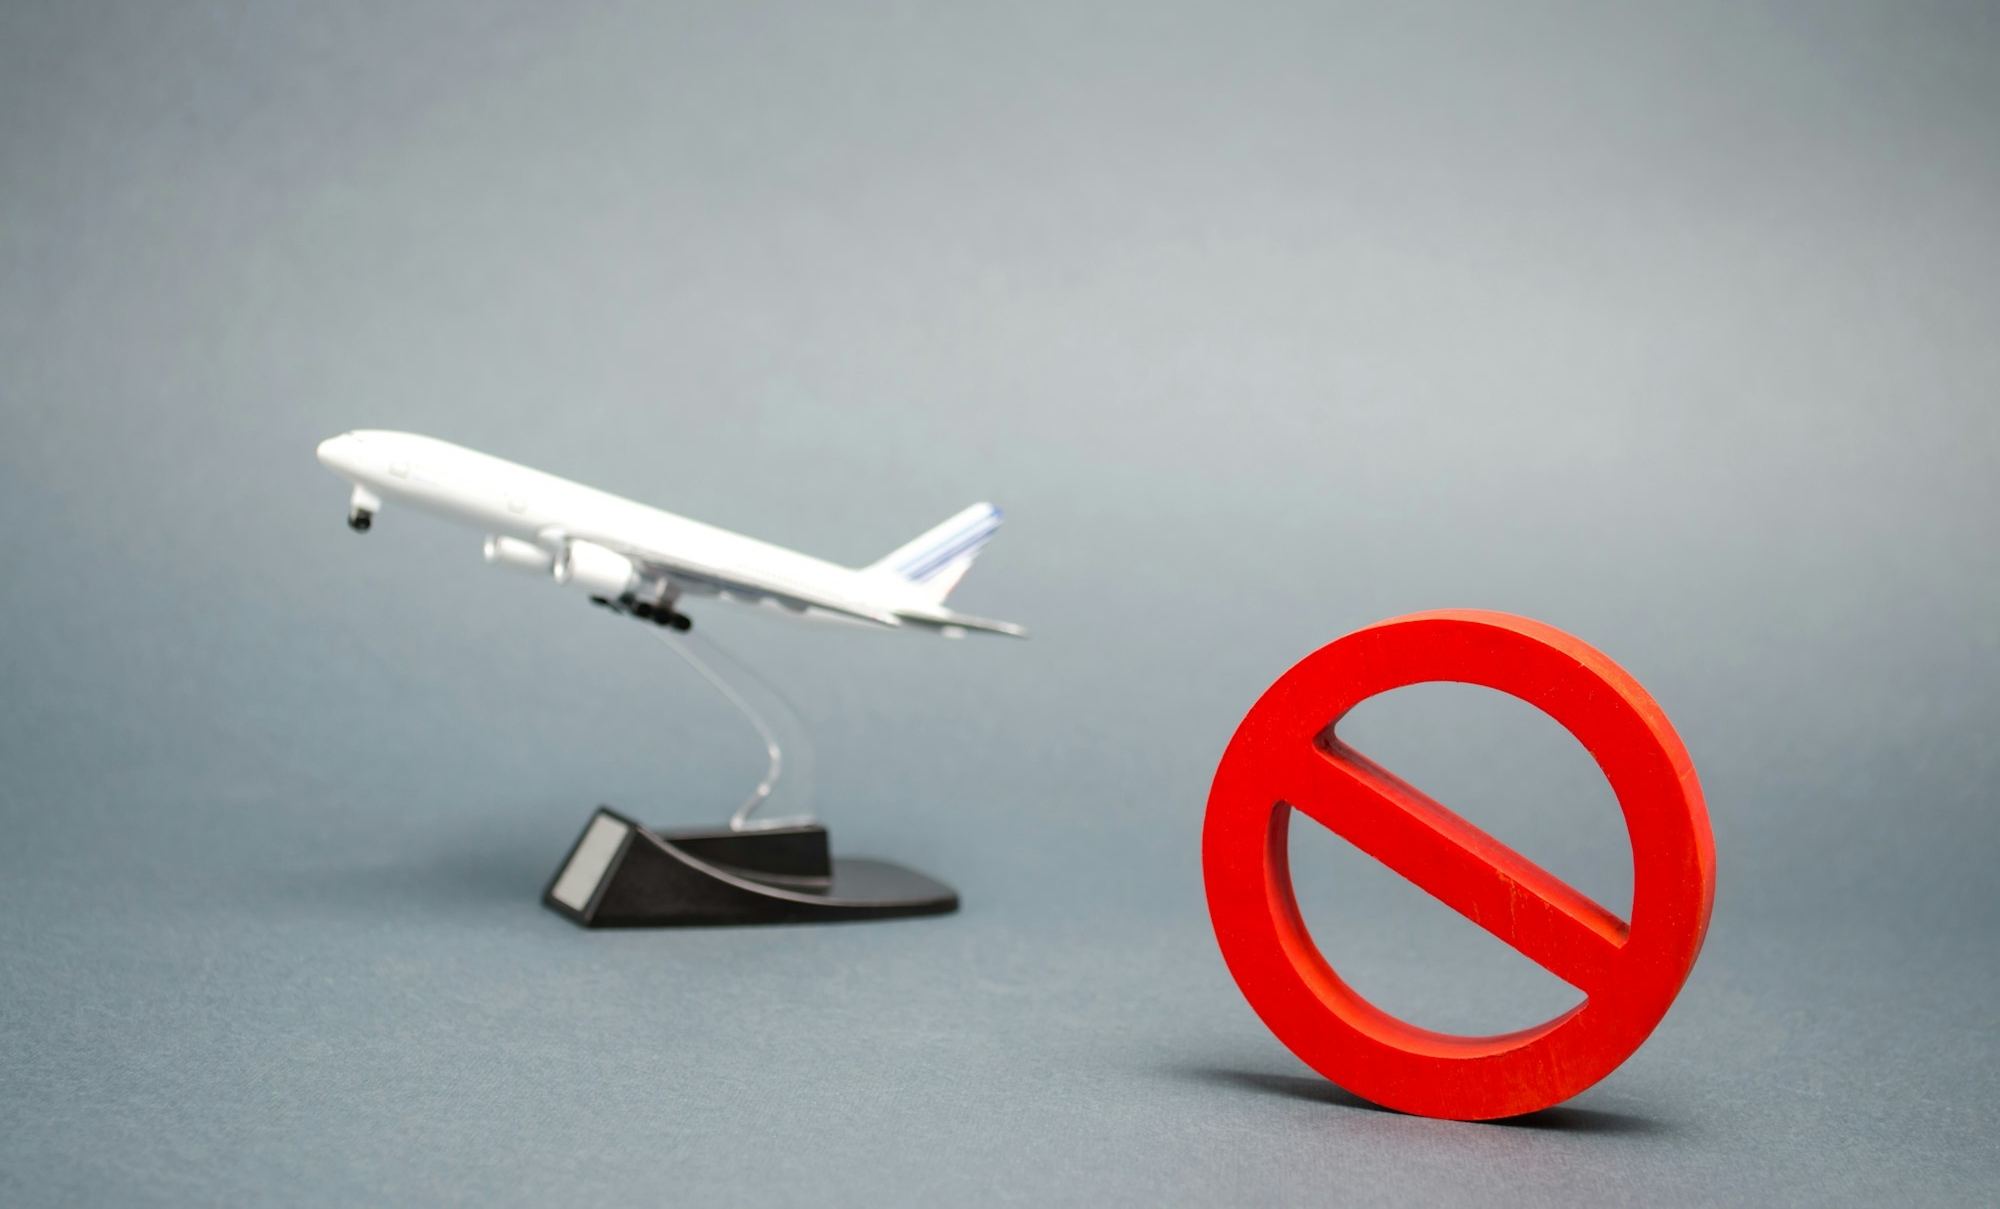 The sign of the ban and a miniature toy aircraft